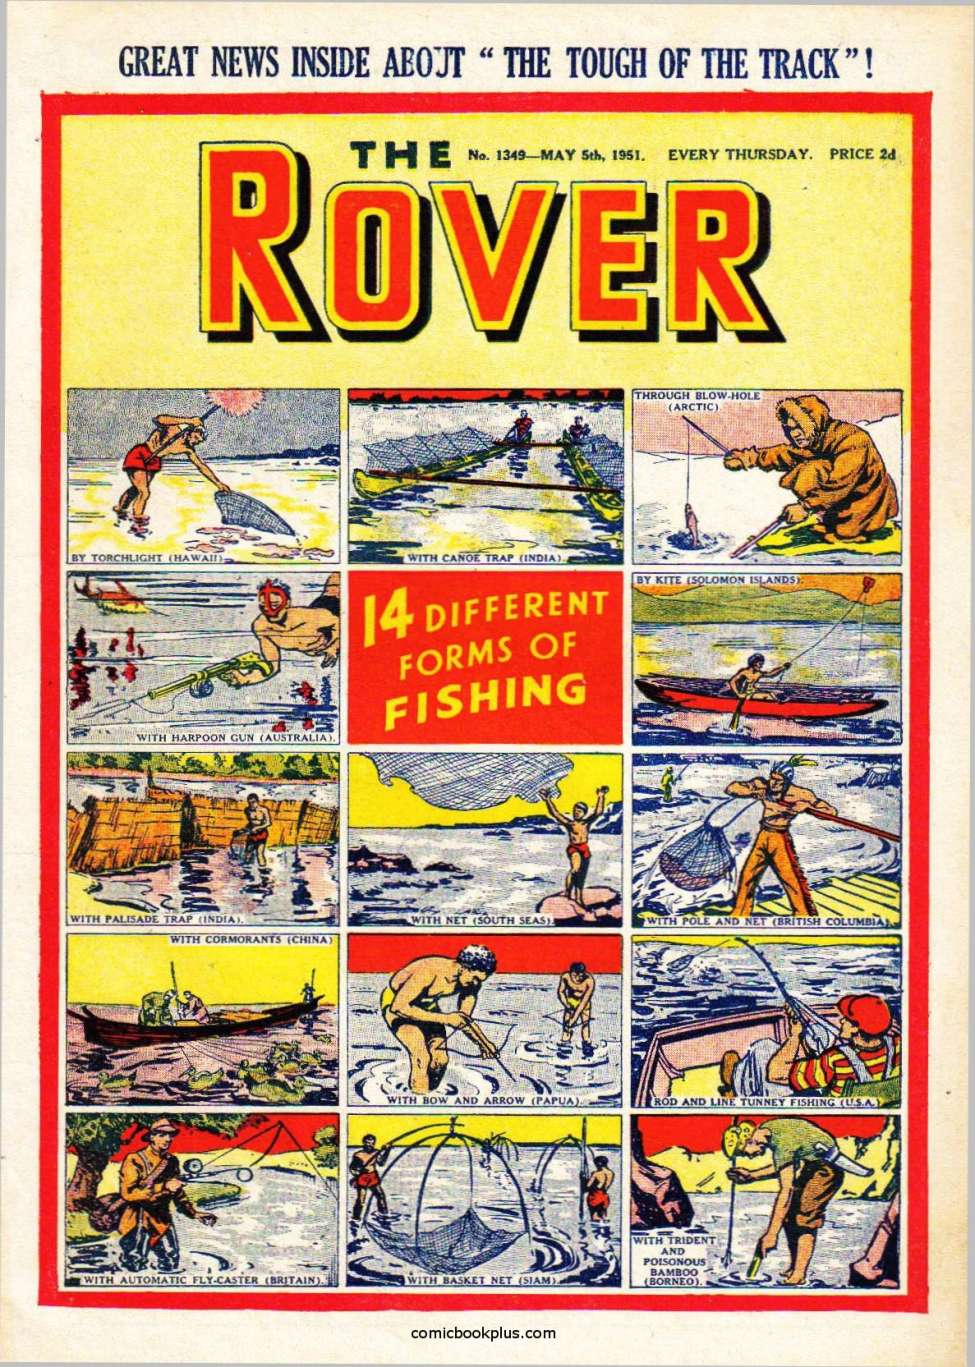 Book Cover For The Rover 1349